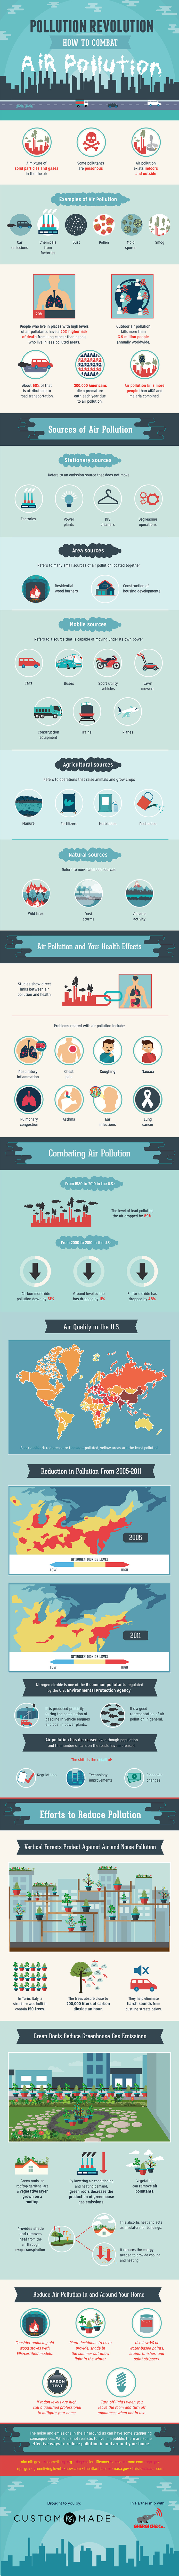 air-pollution info graphic